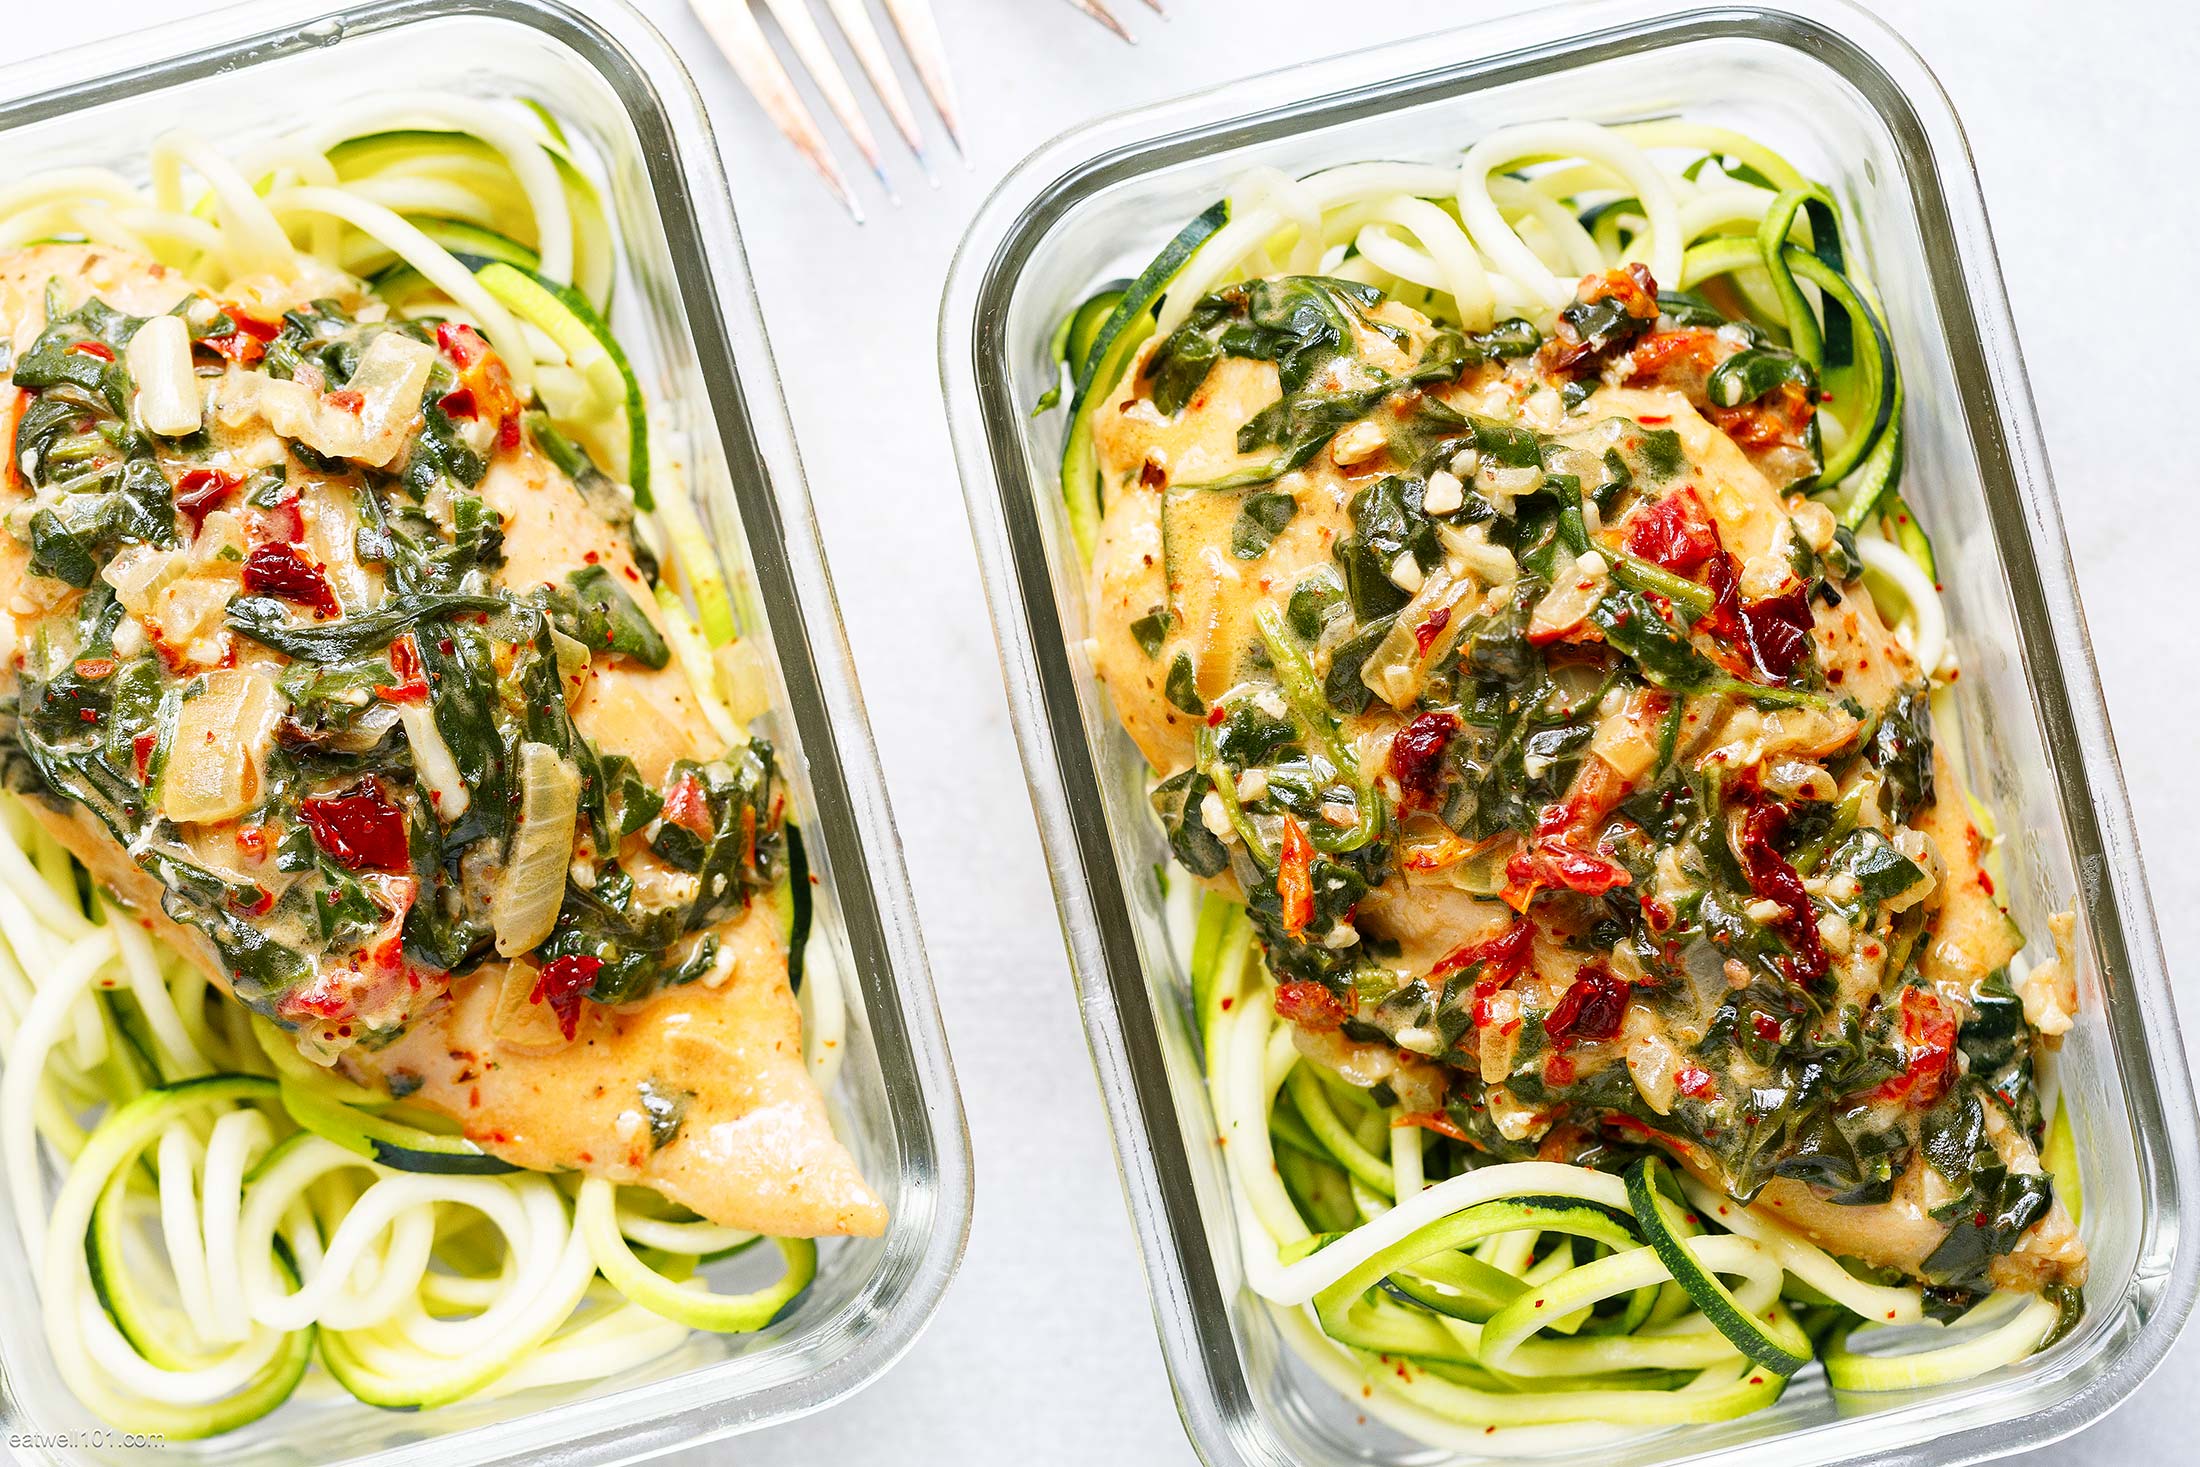 Zoodles 101: How to make and cook zucchini noodles